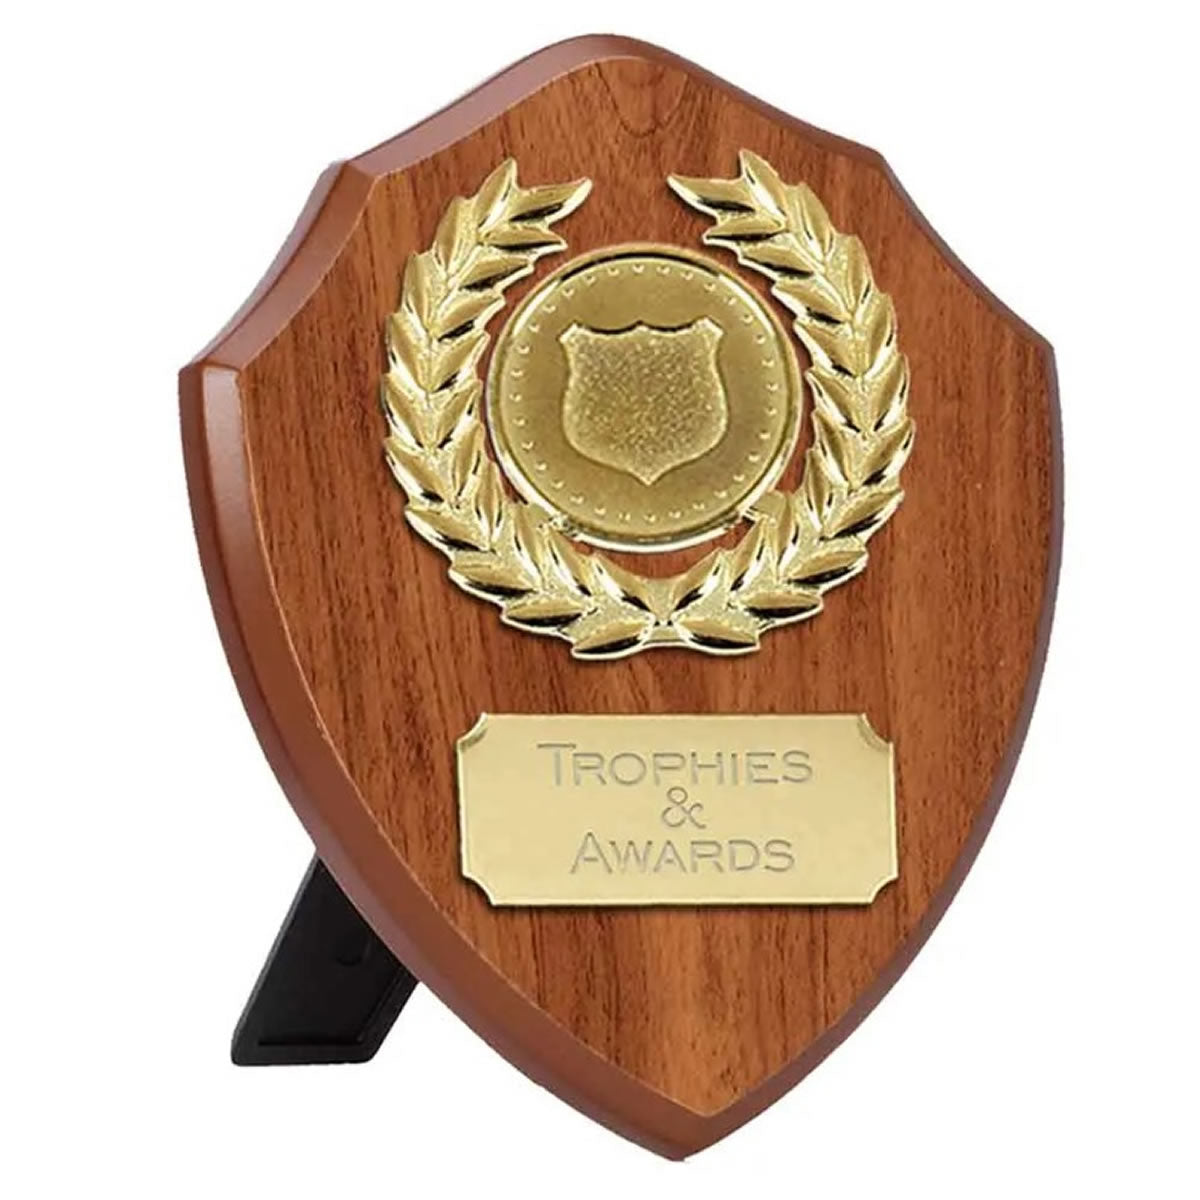 Personalised Wooden Award Plaques for Dorset Cereals